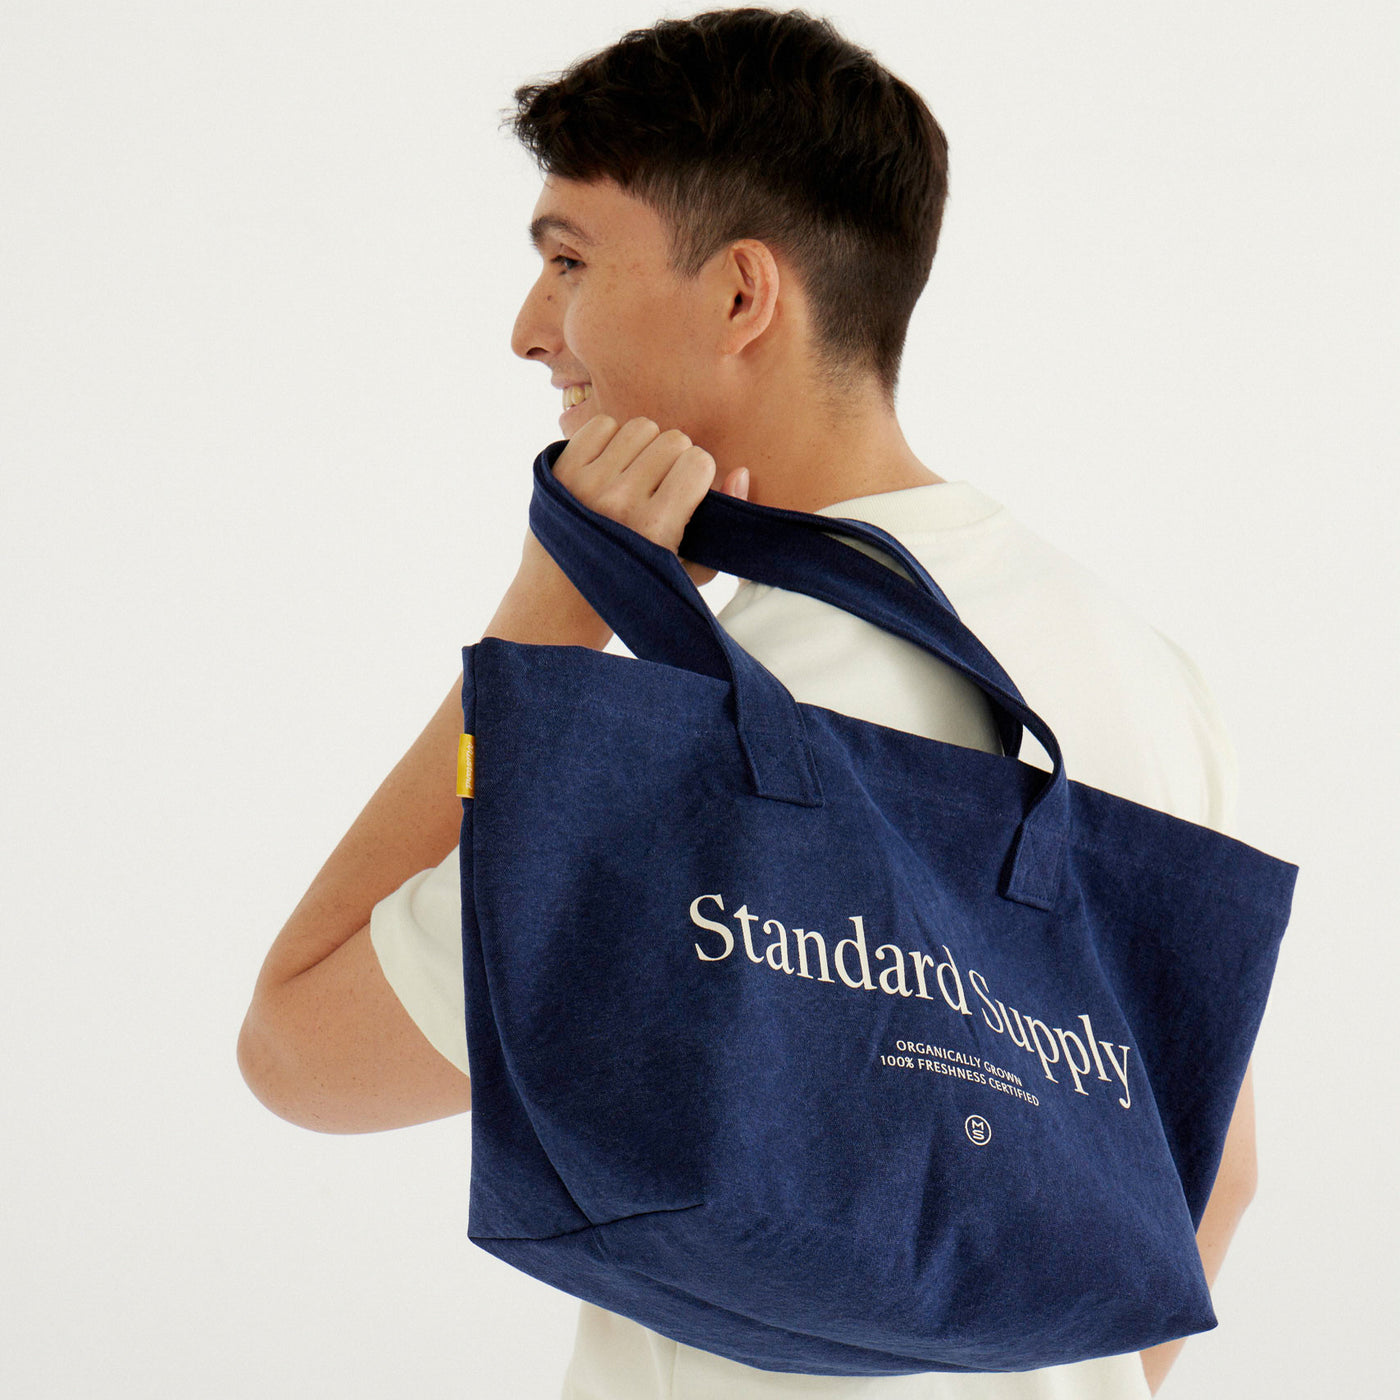 Standard Supply Market Tote - Blueberry